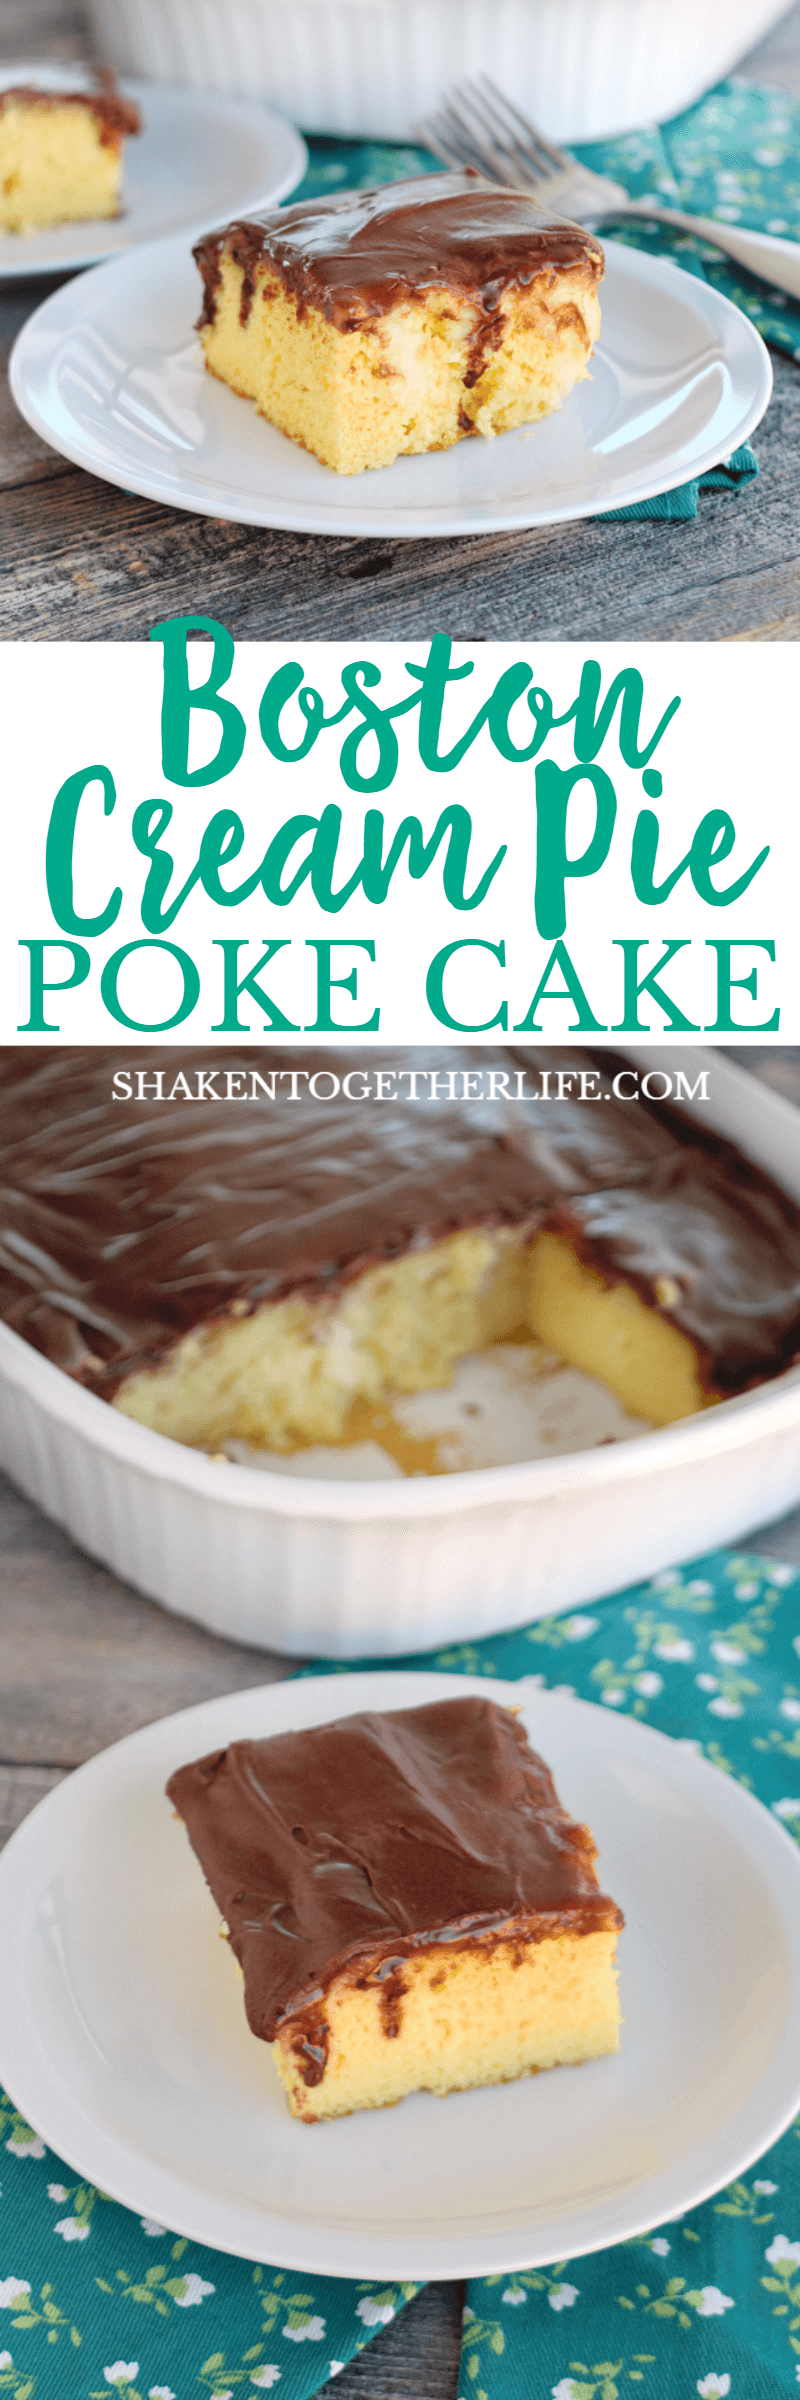 Boston Cream Pie Poke Cake is an easy twist on a classic dessert! You will love the yellow cake, filled with pockets of vanilla pudding topped with a smooth chocolate frosting!